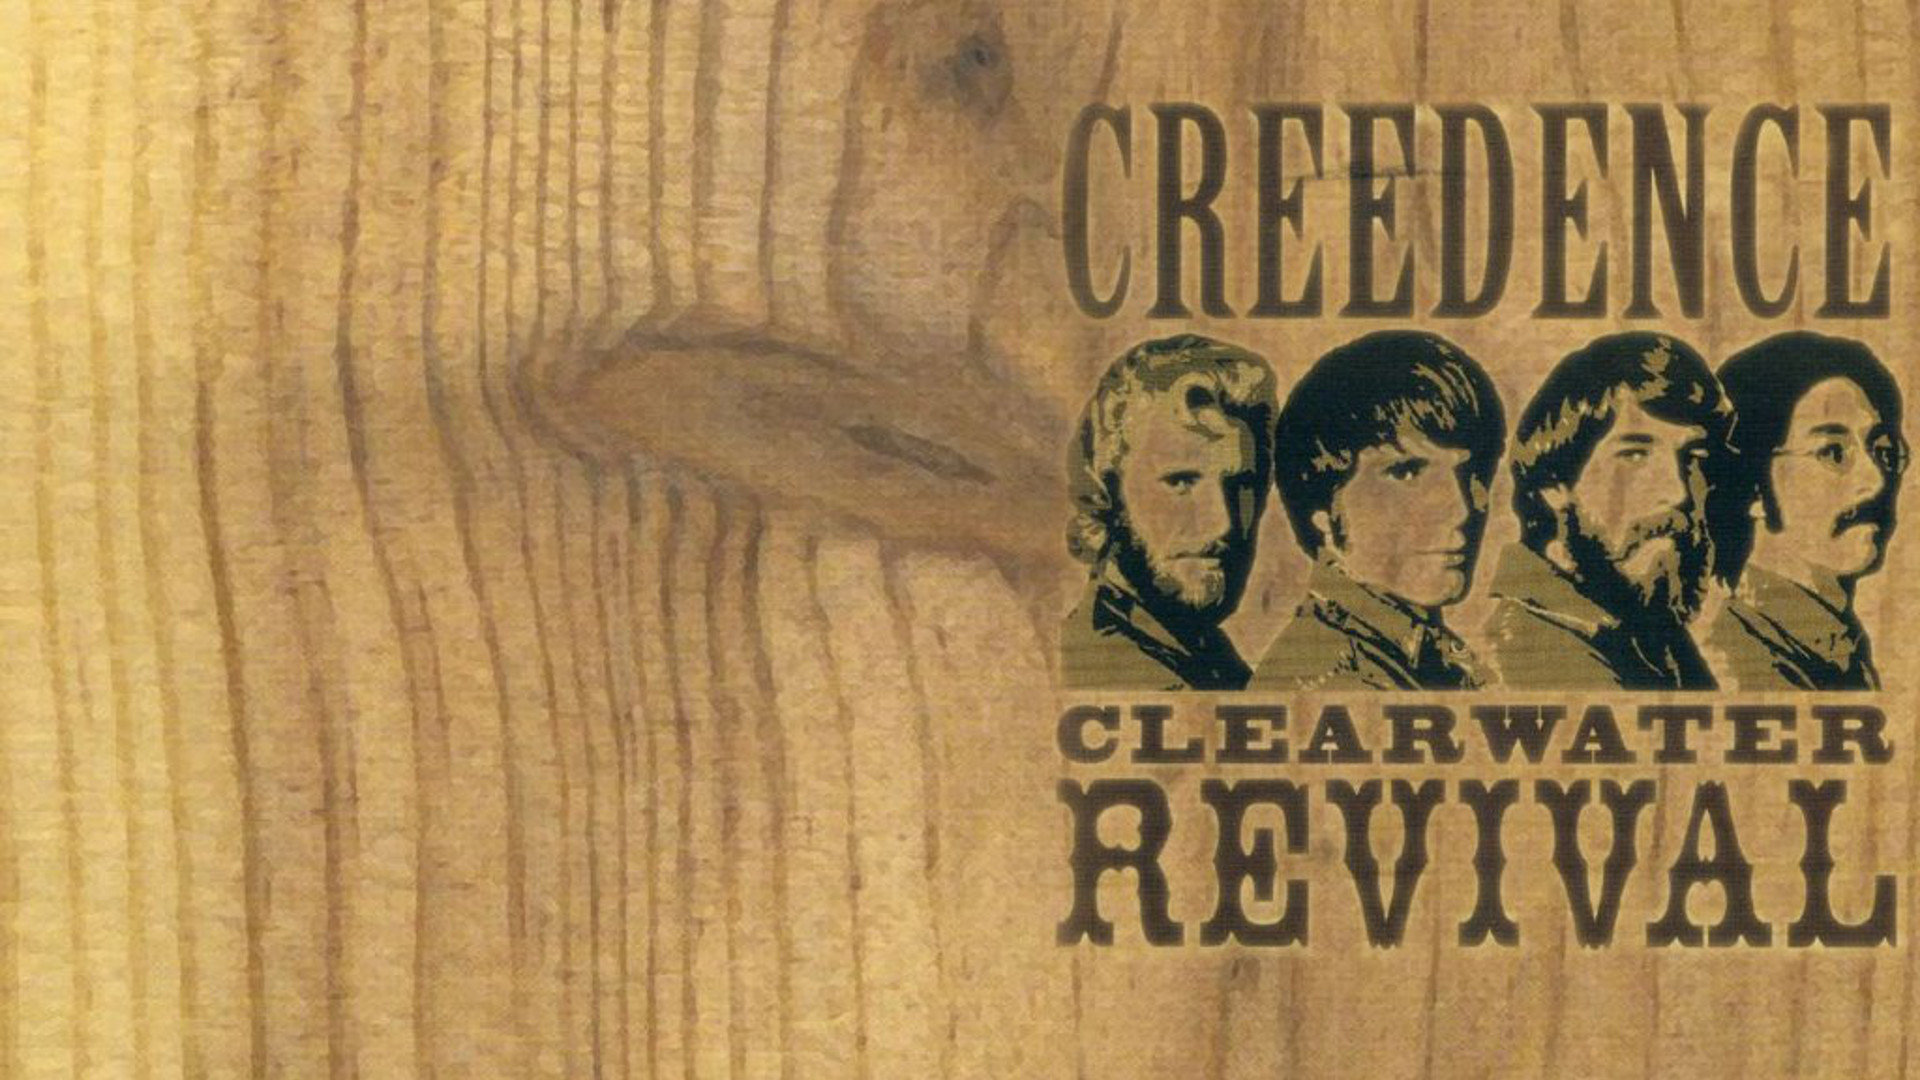 Free Creedence Clearwater Revival high quality wallpaper ID:20072 for full hd 1920x1080 computer